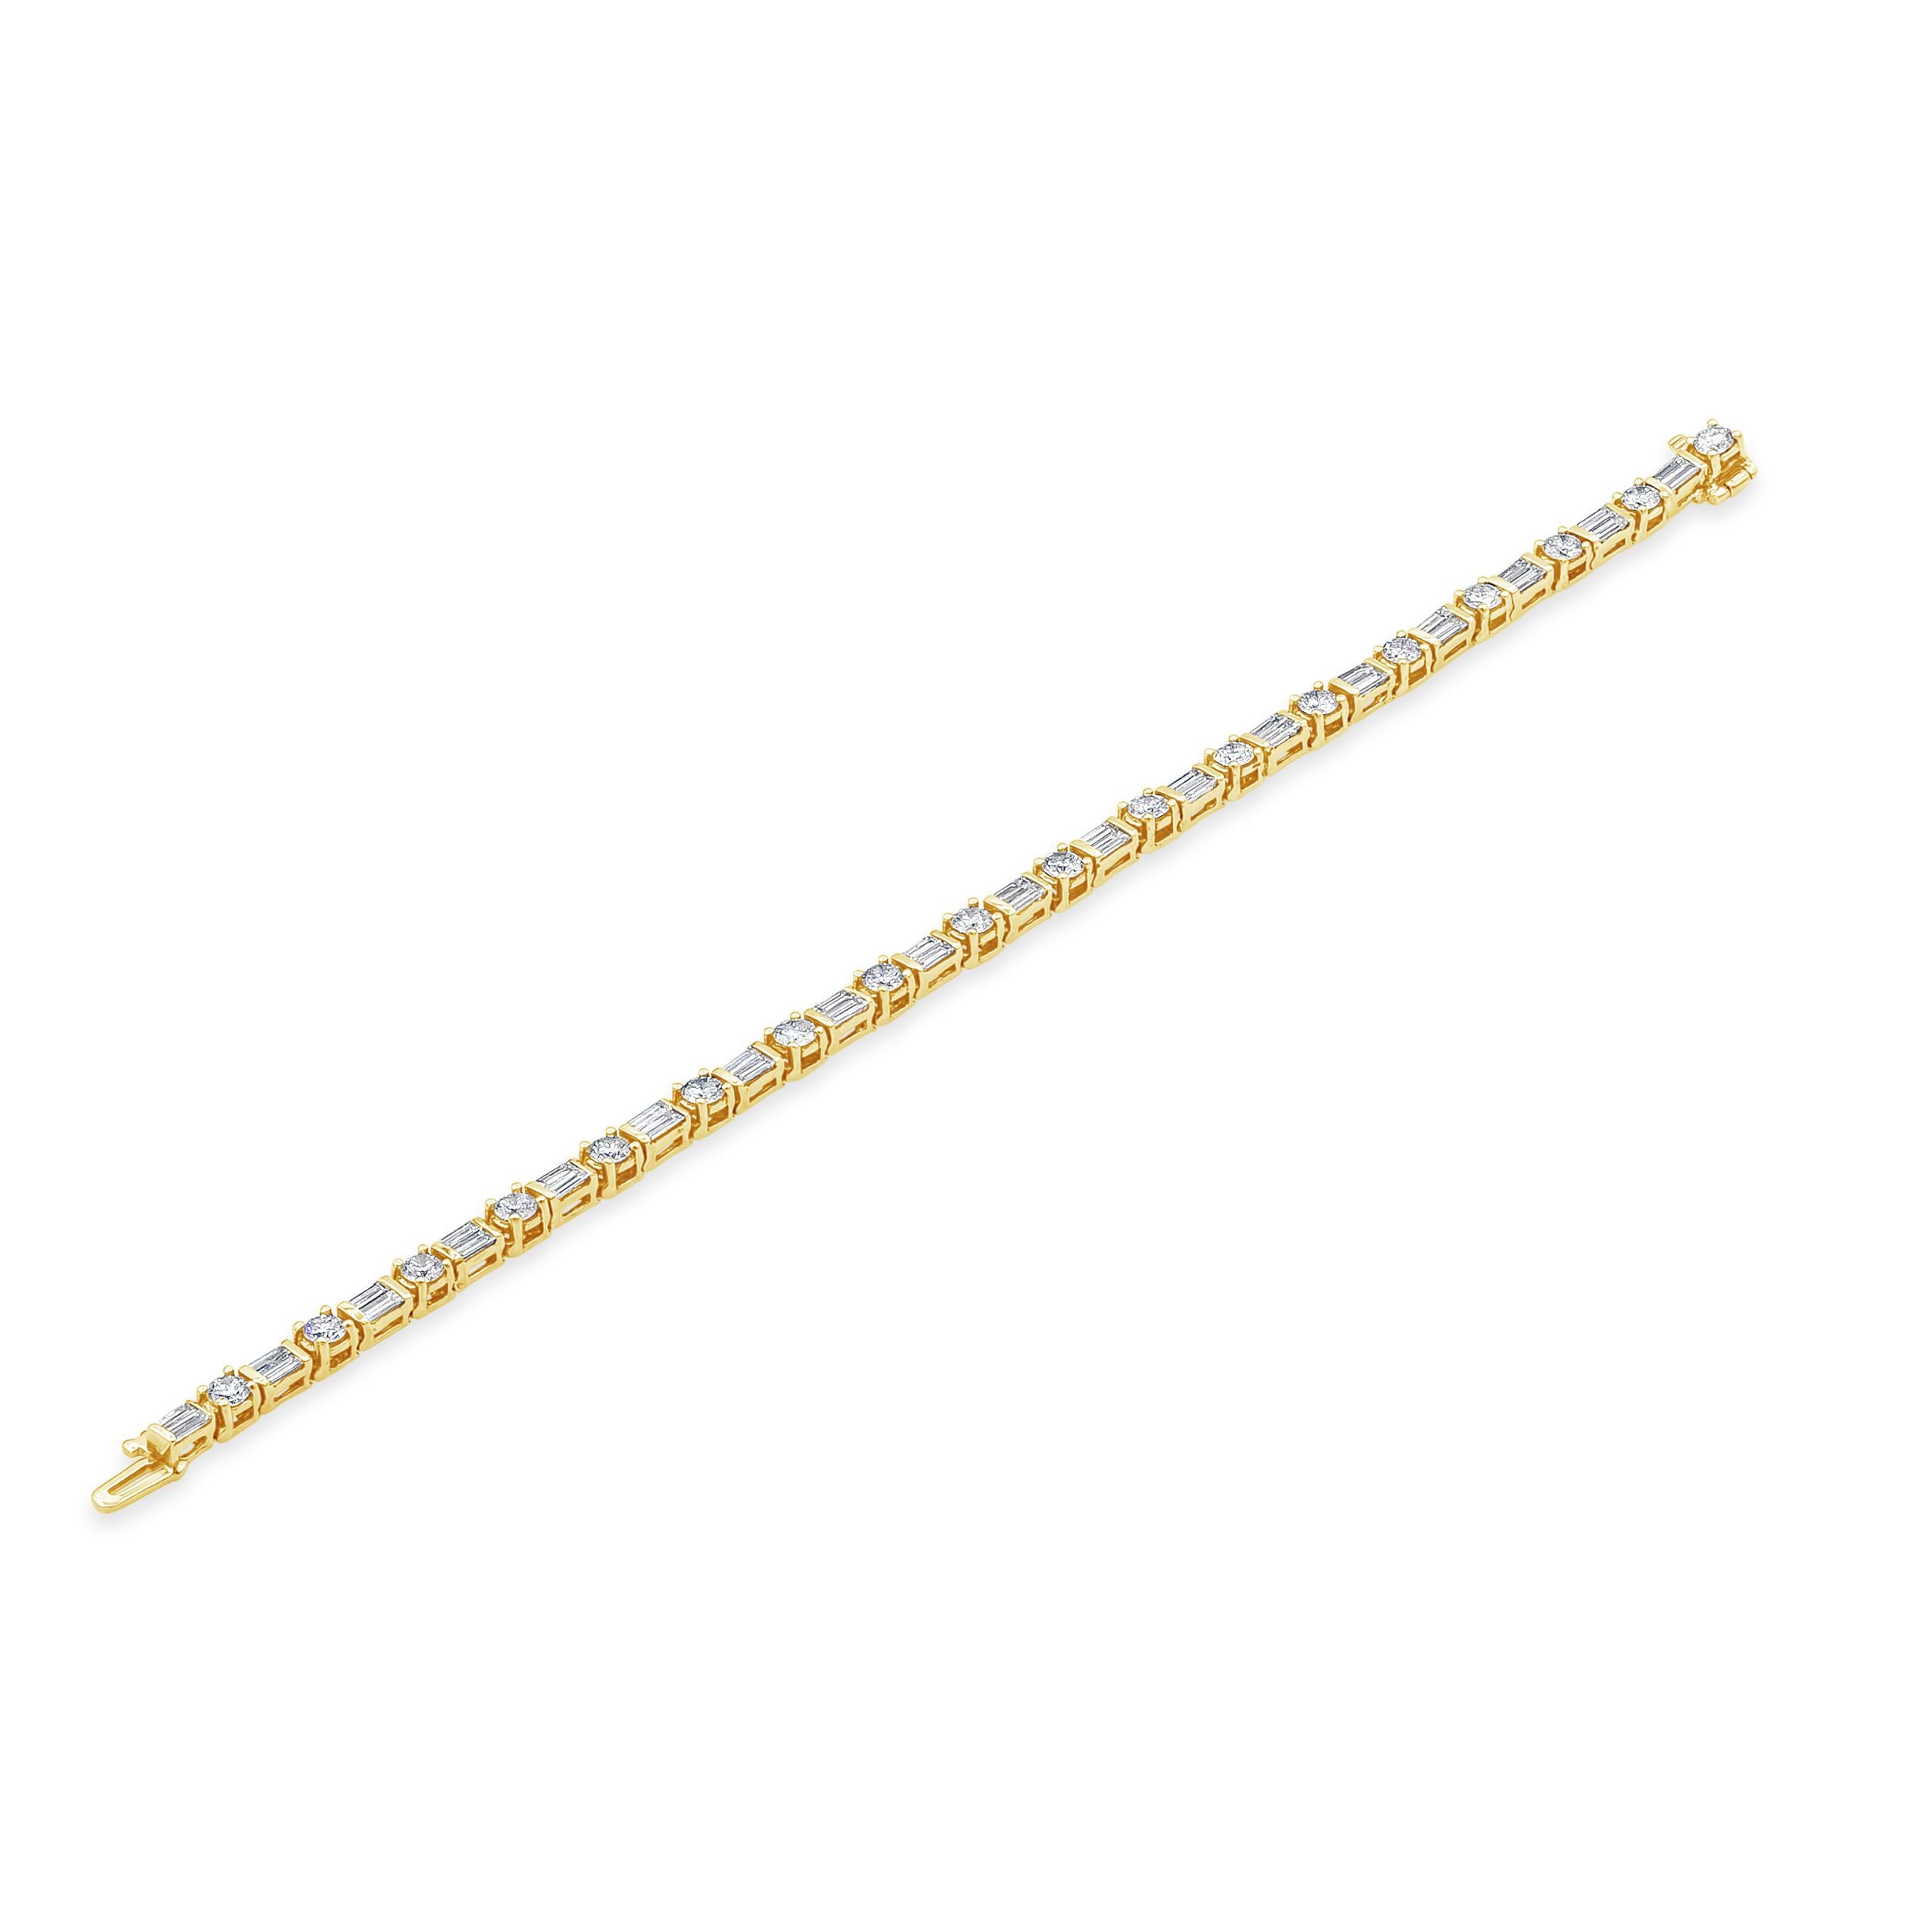 This simple and color-rich tennis bracelet features a brilliant round diamonds weighing 2.73 carats and baguette cut diamonds weighing 2.43 carats elegantly alternates with each other. Bar set, Made in 18K Yellow Gold, 7 inches in Length. 

Roman